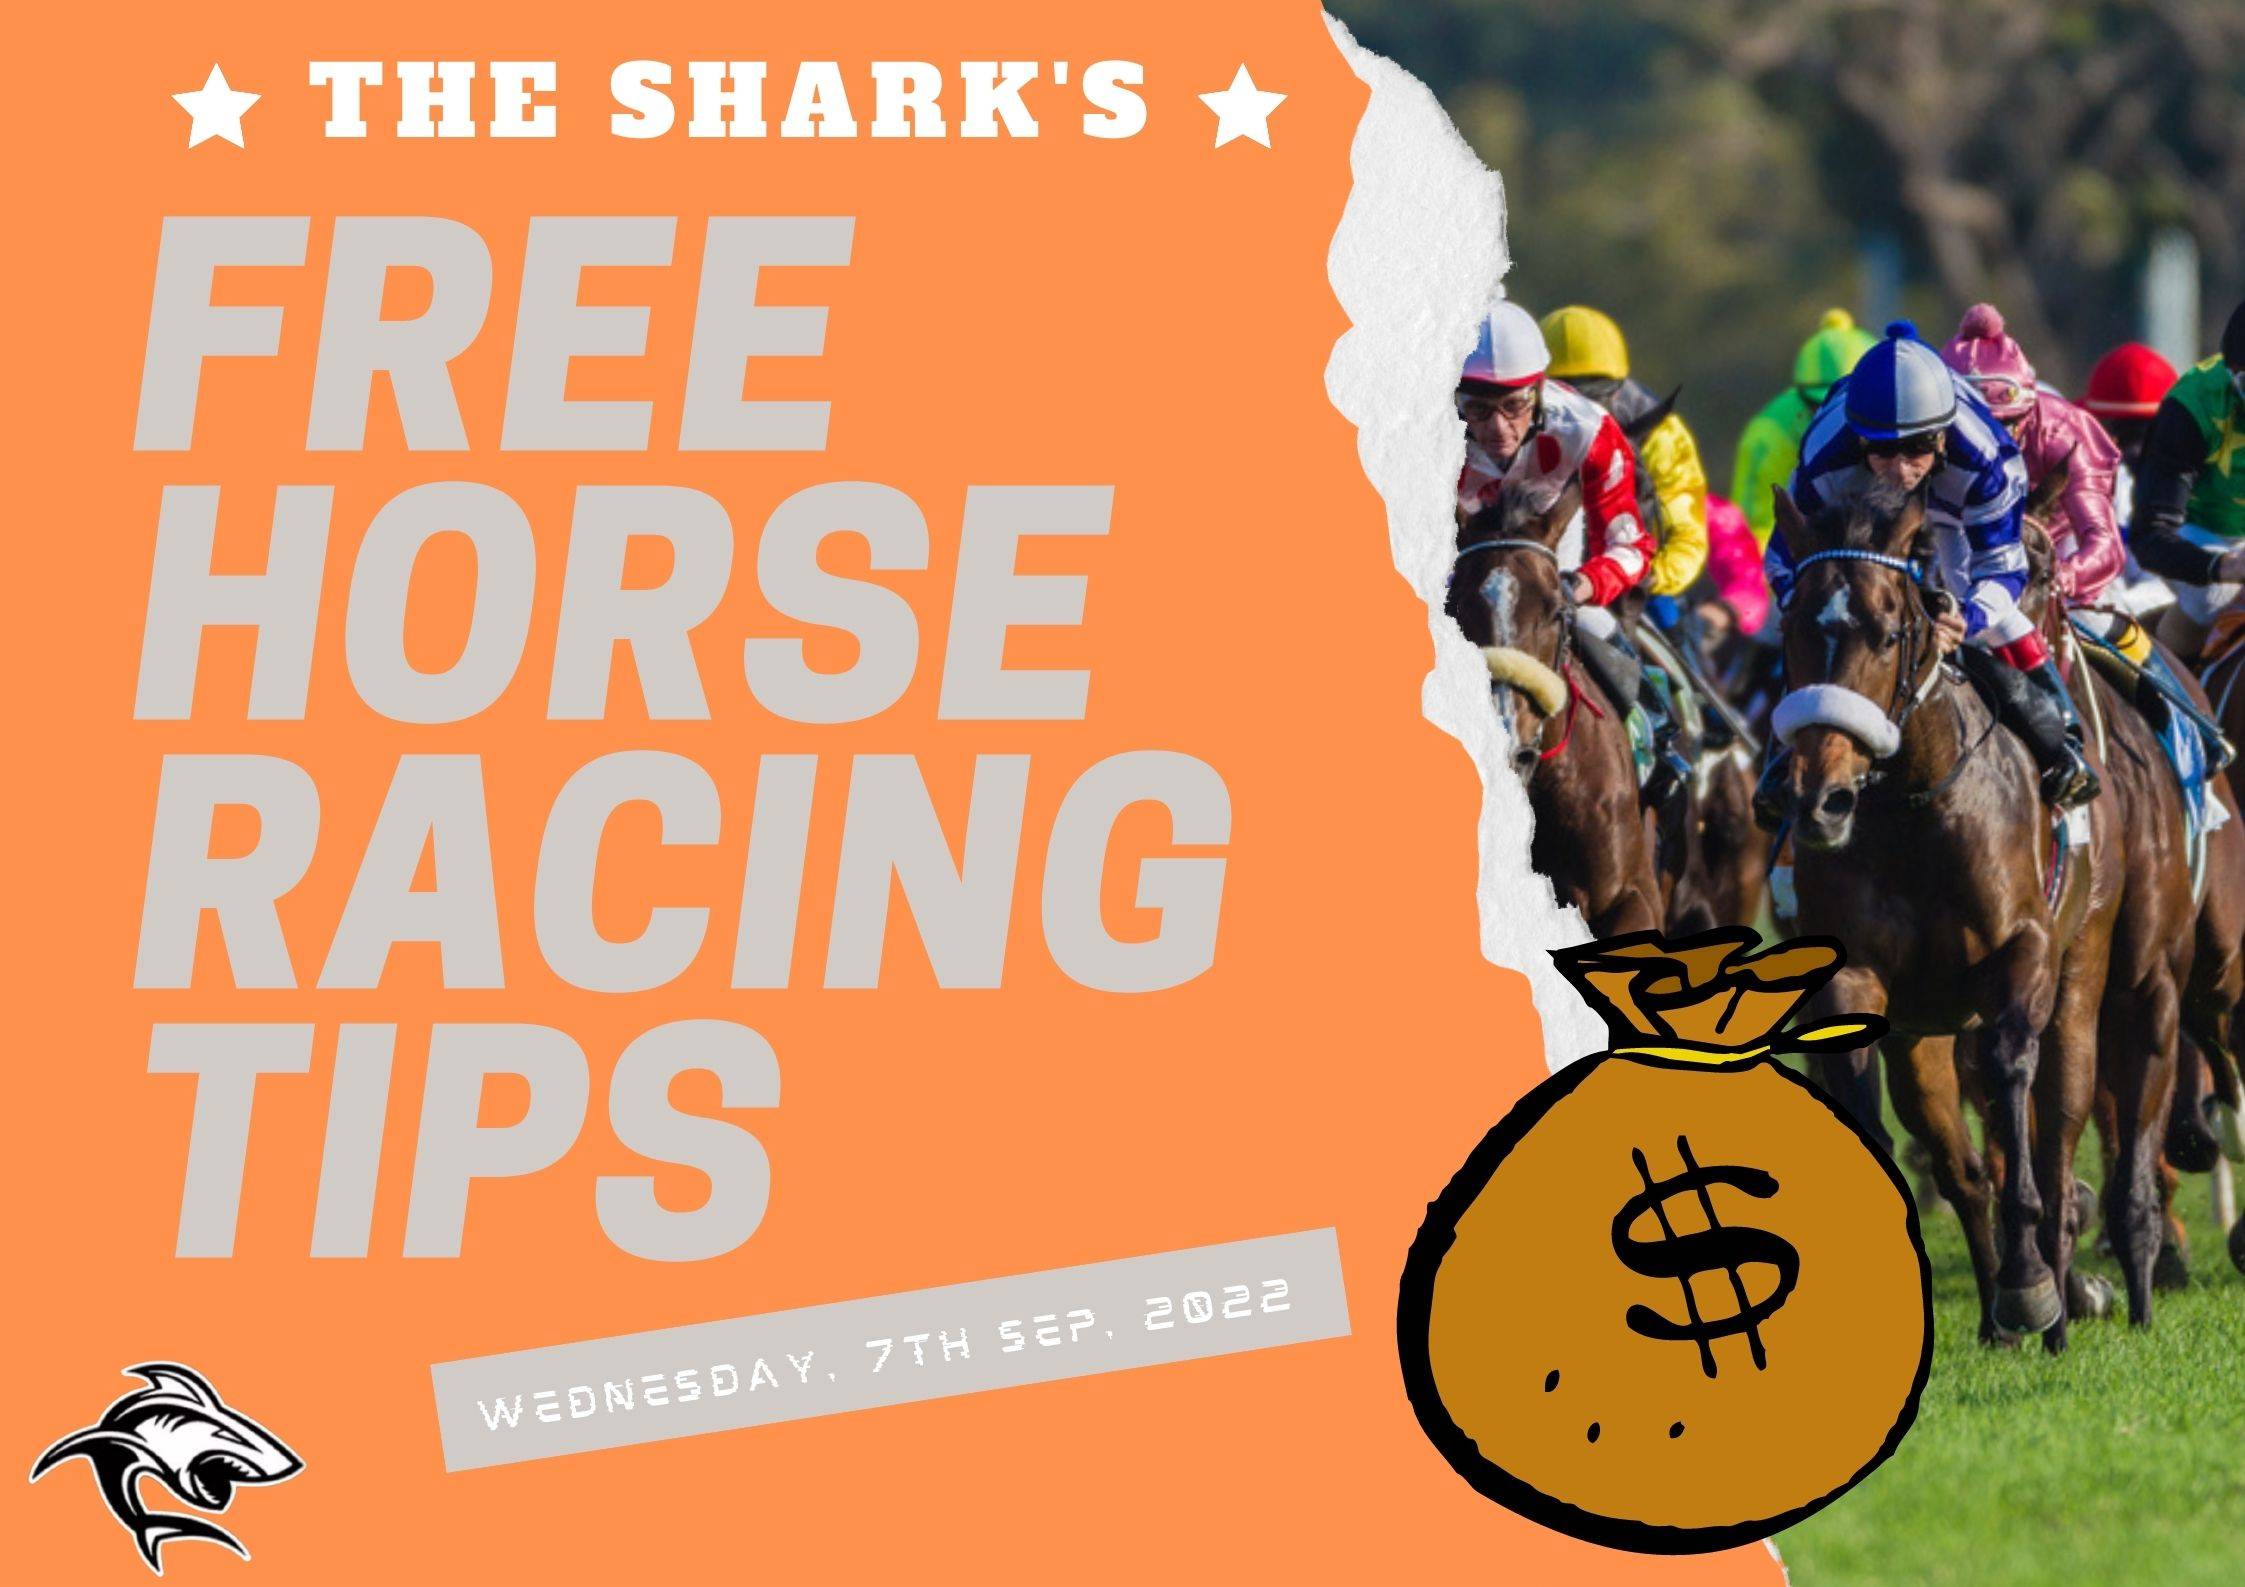 Free Horse Racing Tips - 7th Sep